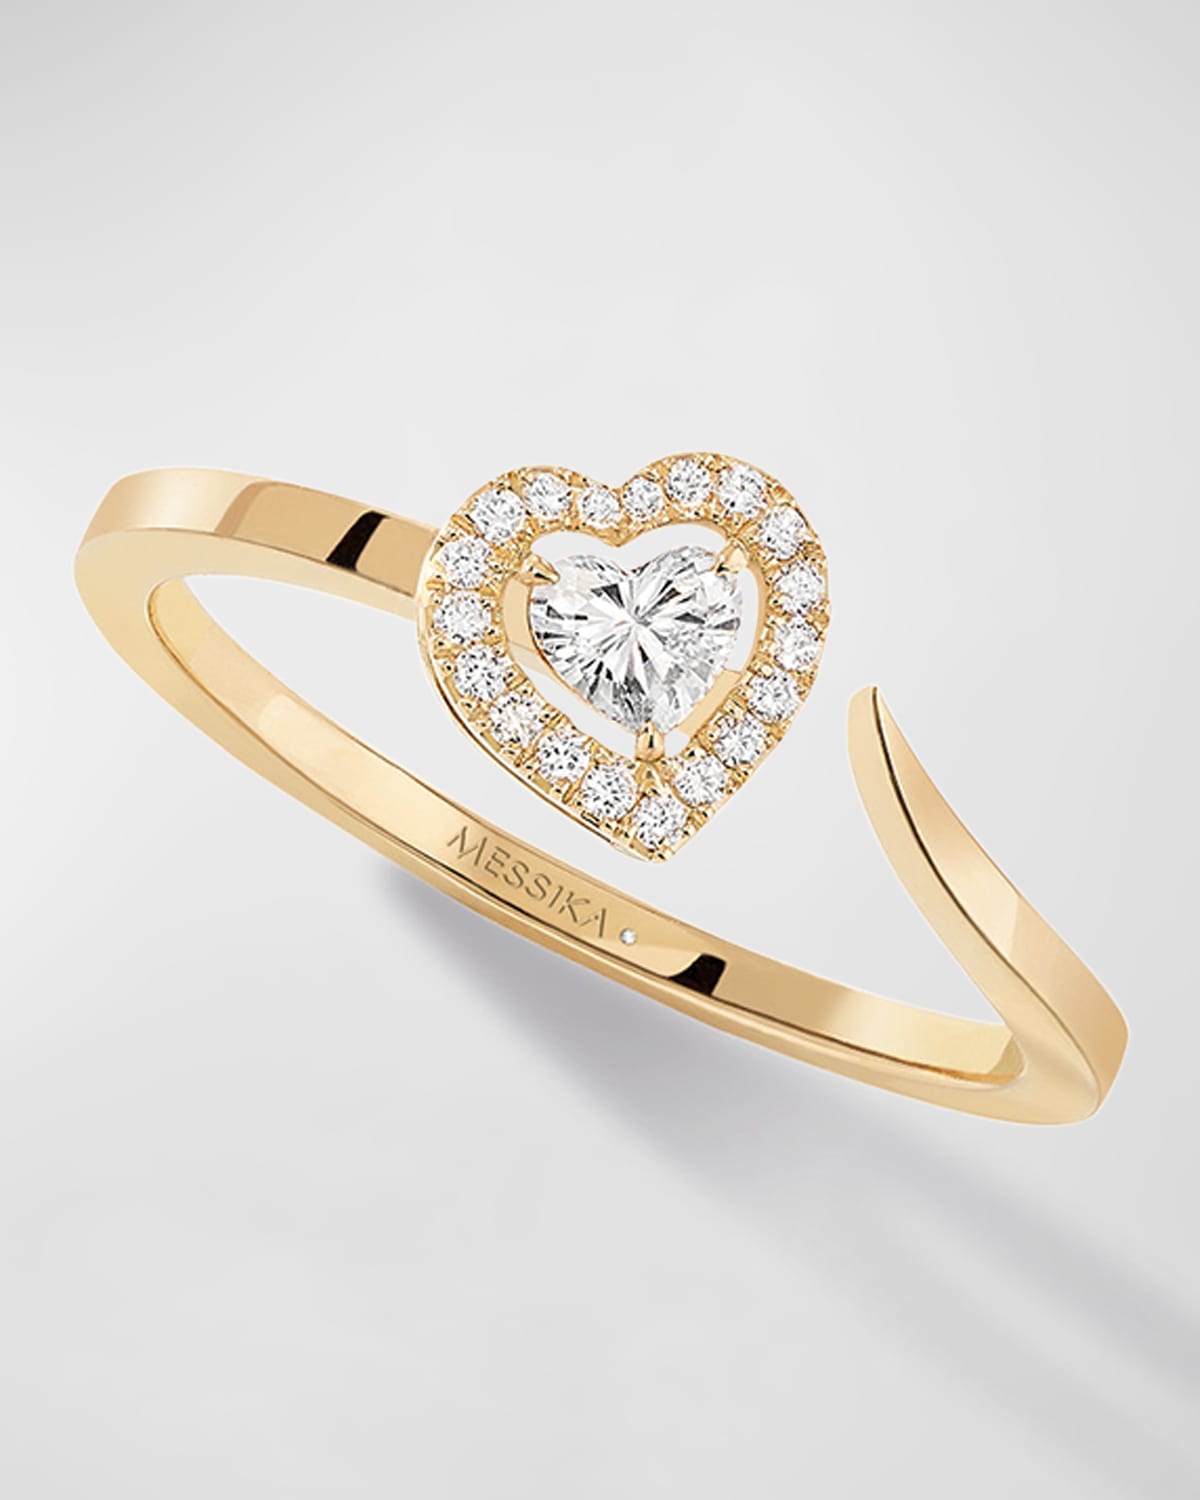 Messika Joy Couer 18k Yellow Gold Diamond Heart Ring In 05 Yellow Gold